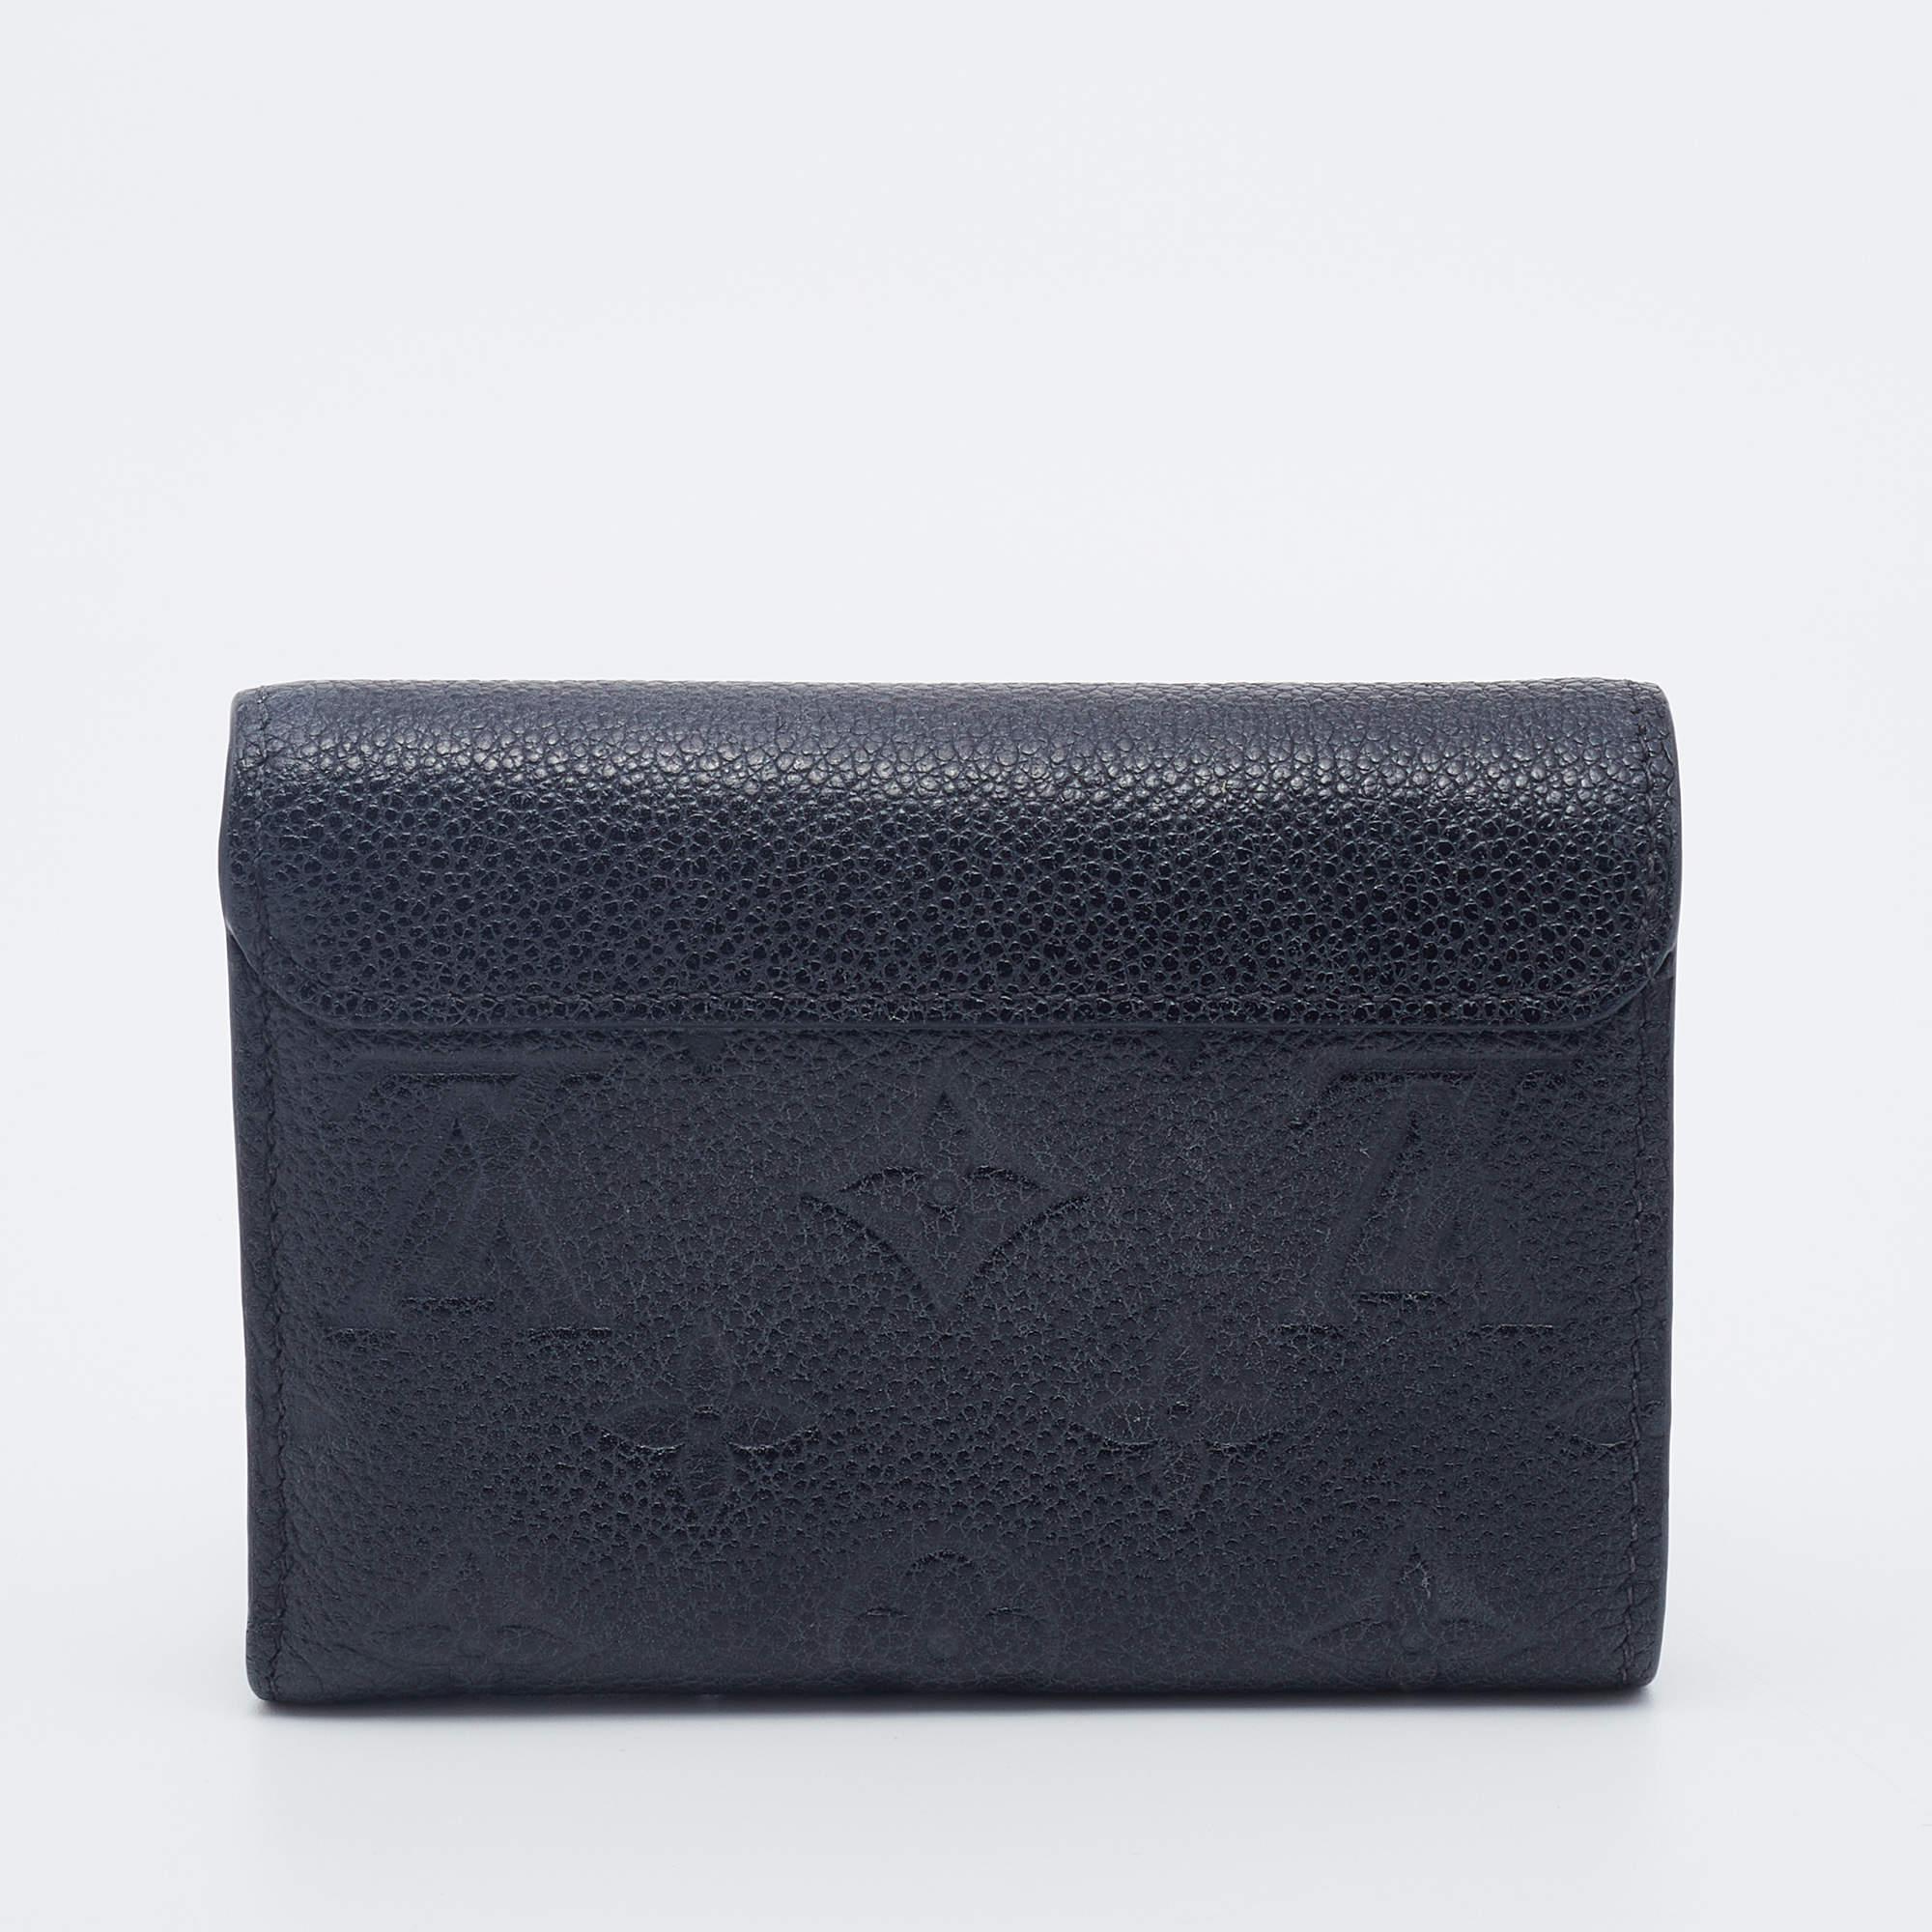 This compact wallet from Louis Vuitton will surely fetch you a lot of compliments. Designed using Monogram Empreinte Pont Neuf leather, this wallet has gold-tone fittings and a spacious interior. Elegance meets style effortlessly when you team up